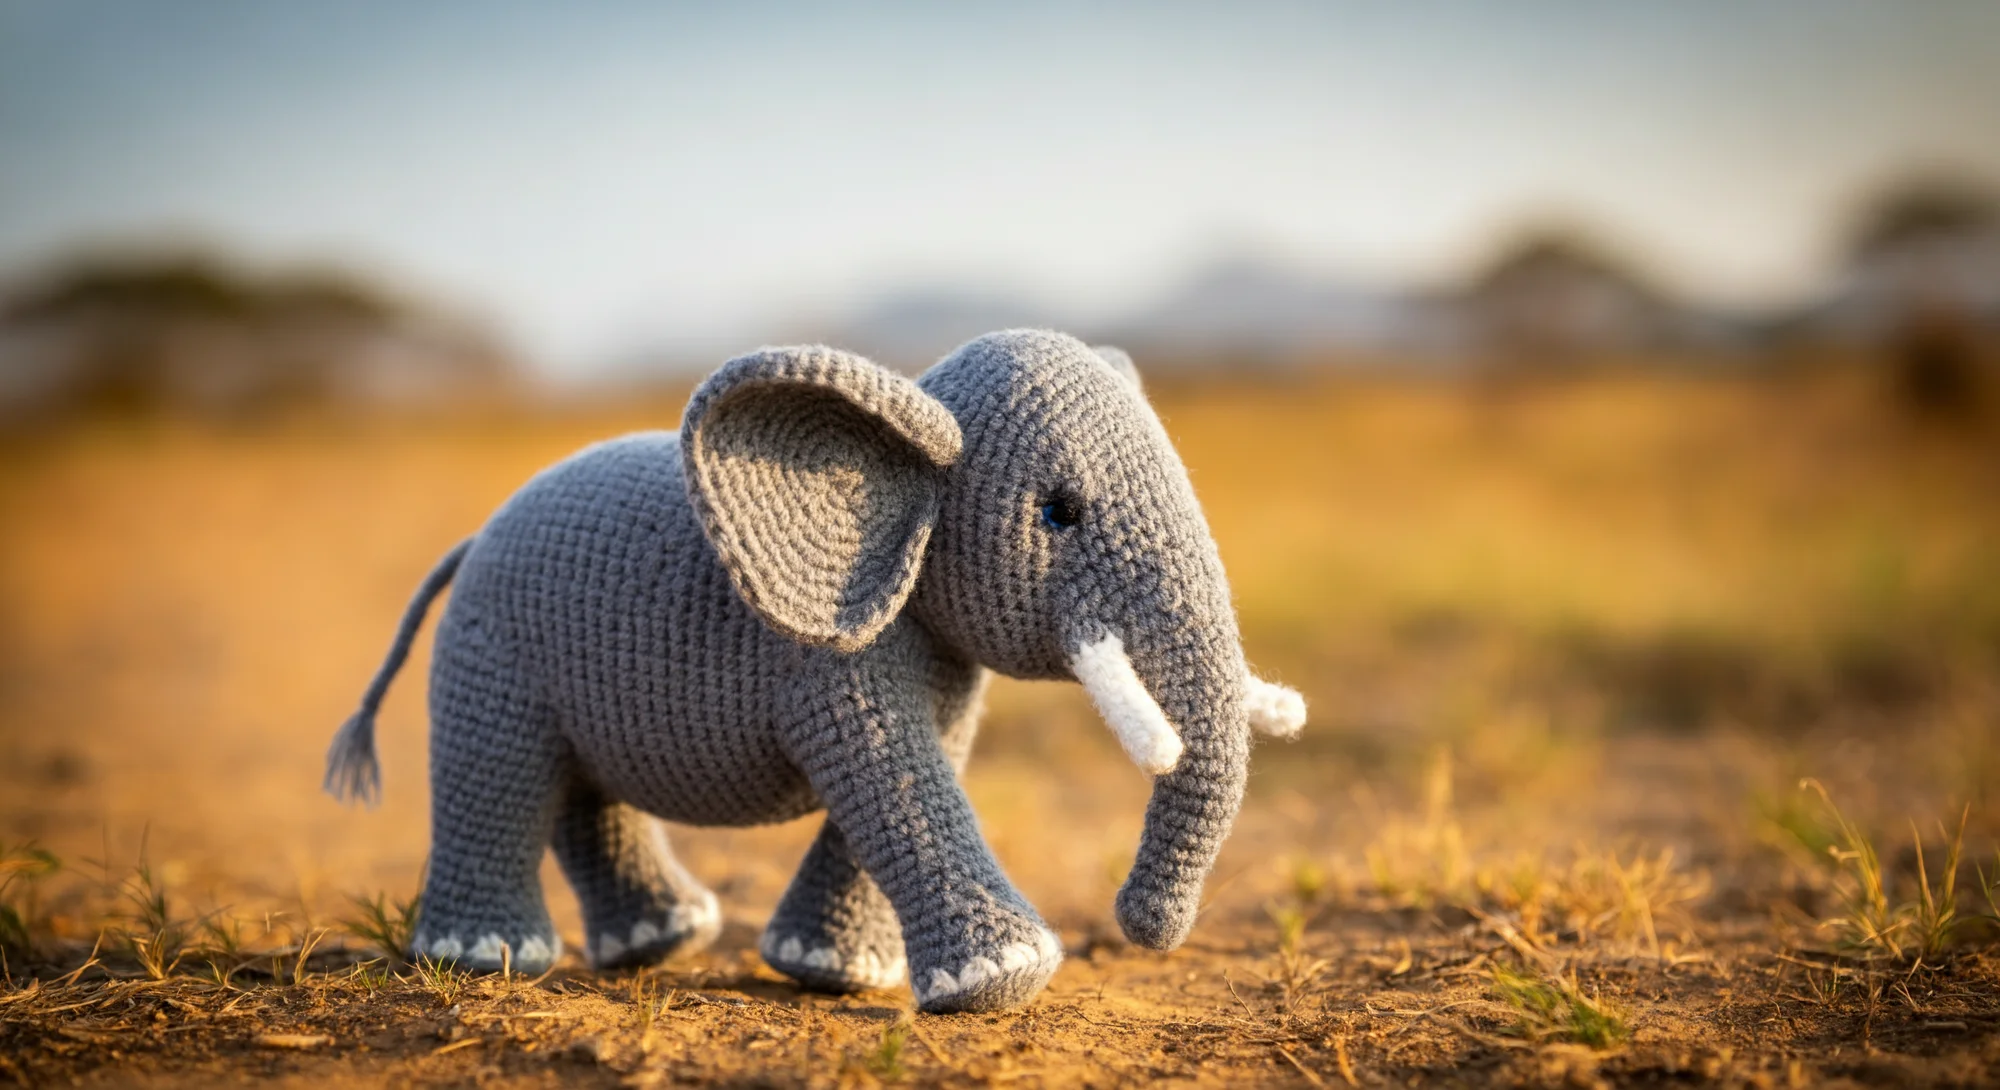 A small, gray crocheted elephant toy stands on a dirt path in a grassy field. The elephant has white tusks and toenails and black eyes. The background is a blur of green and brown foliage, with the sun setting in the distance.